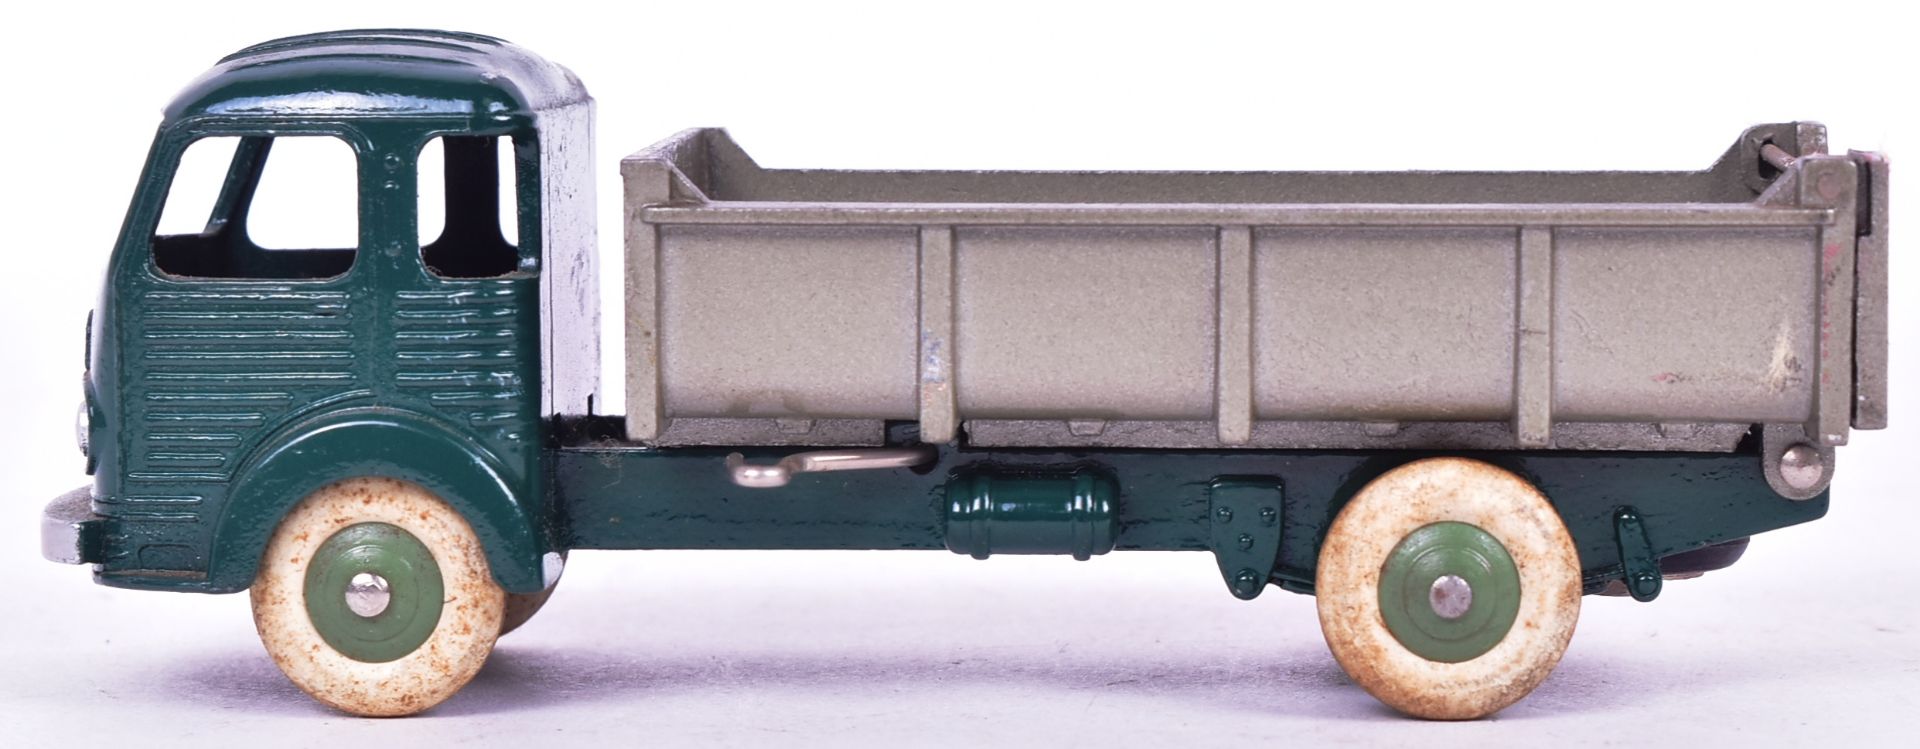 DIECAST - FRENCH DINKY TOYS - SIMCA CARGO TIPPING TRUCK - Image 2 of 5